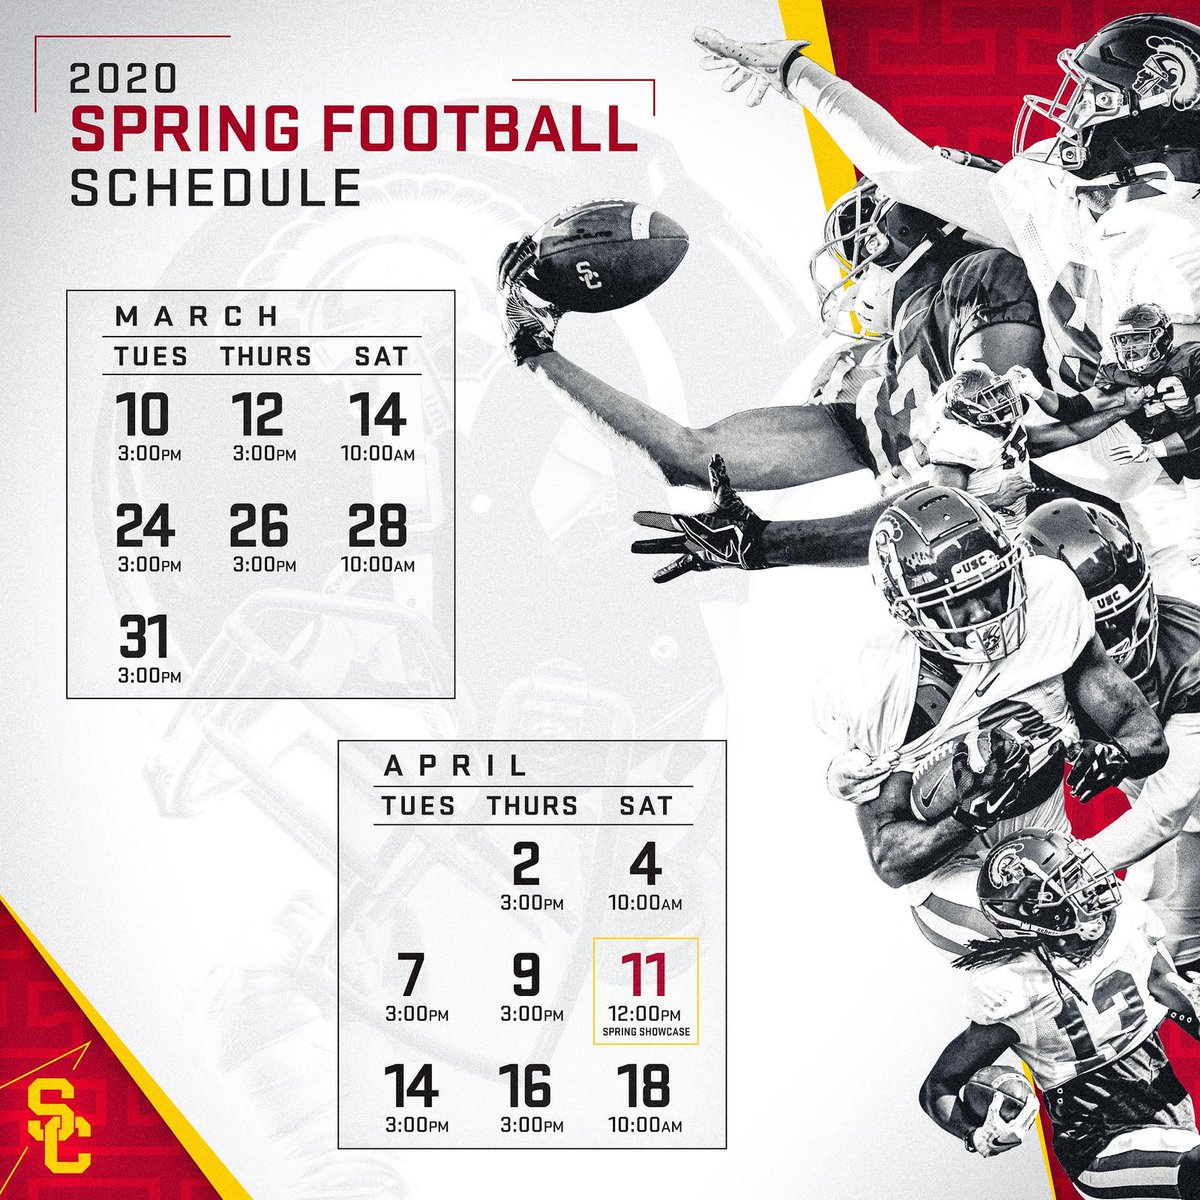 Spring ball is less than a month away!! Recruits, lock in these dates! #TrojanMade | #FightOn ✌️